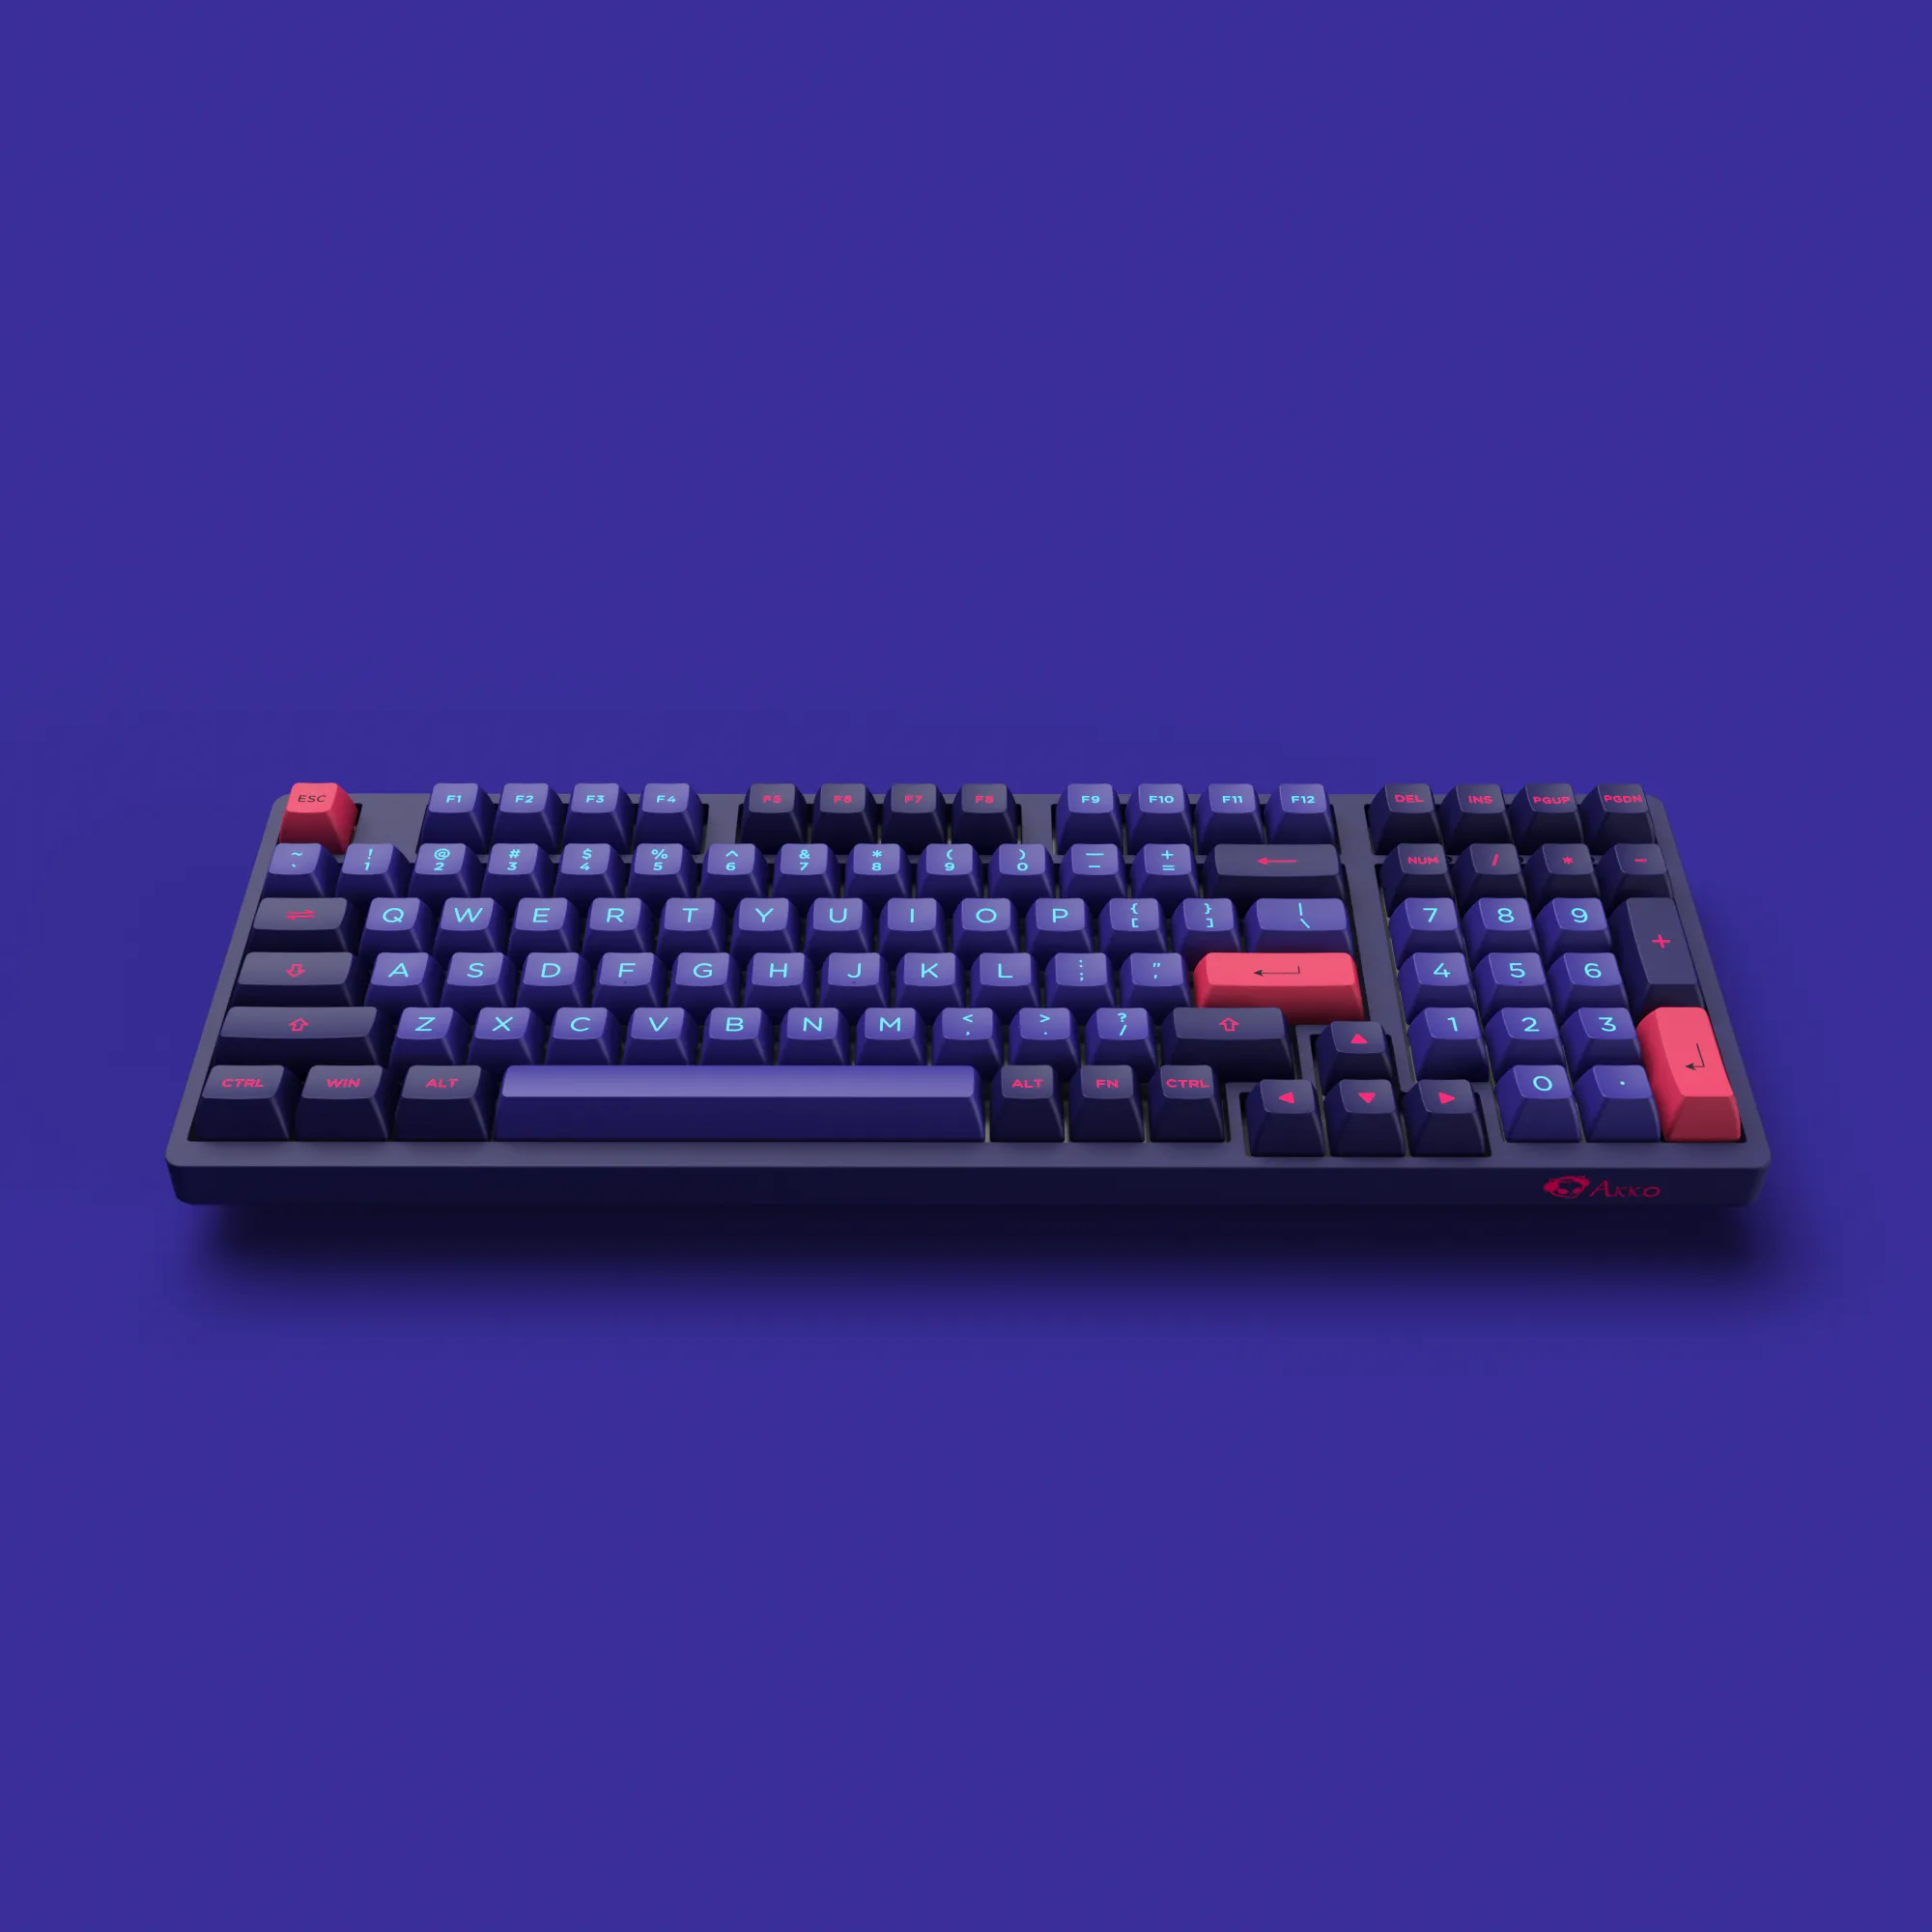 Akko 3098 Neon Full Size Wired Mechanical Gaming Keyboard PBT Double shot Keycaps for Mac Wins 1 - Pudding Keycap